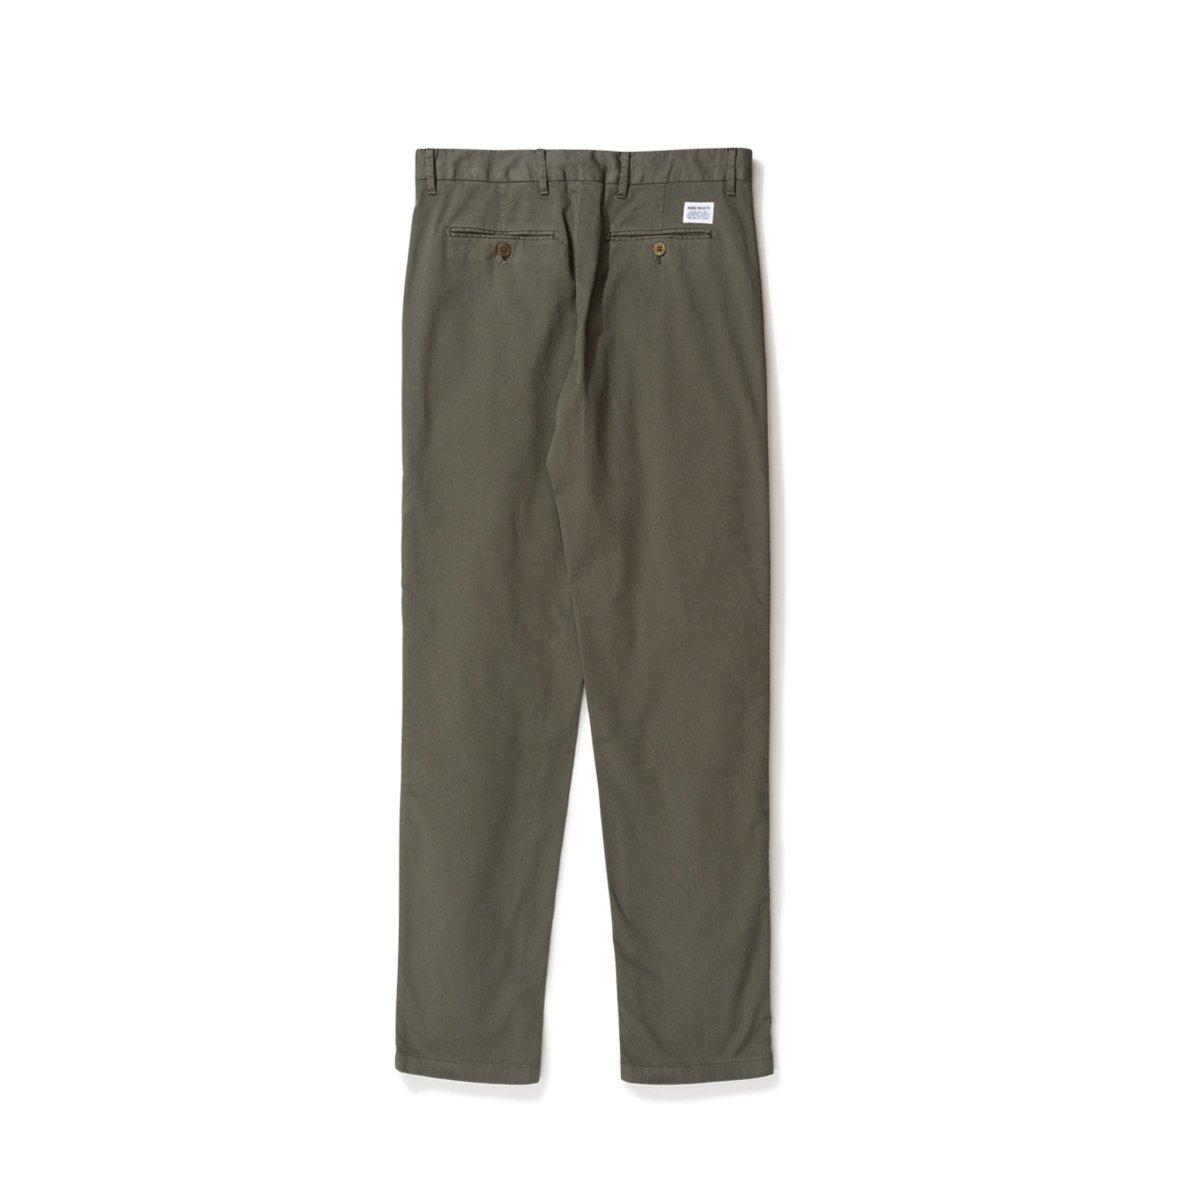 Norse Projects Aros Light Twill Pants (Olive)  - Allike Store